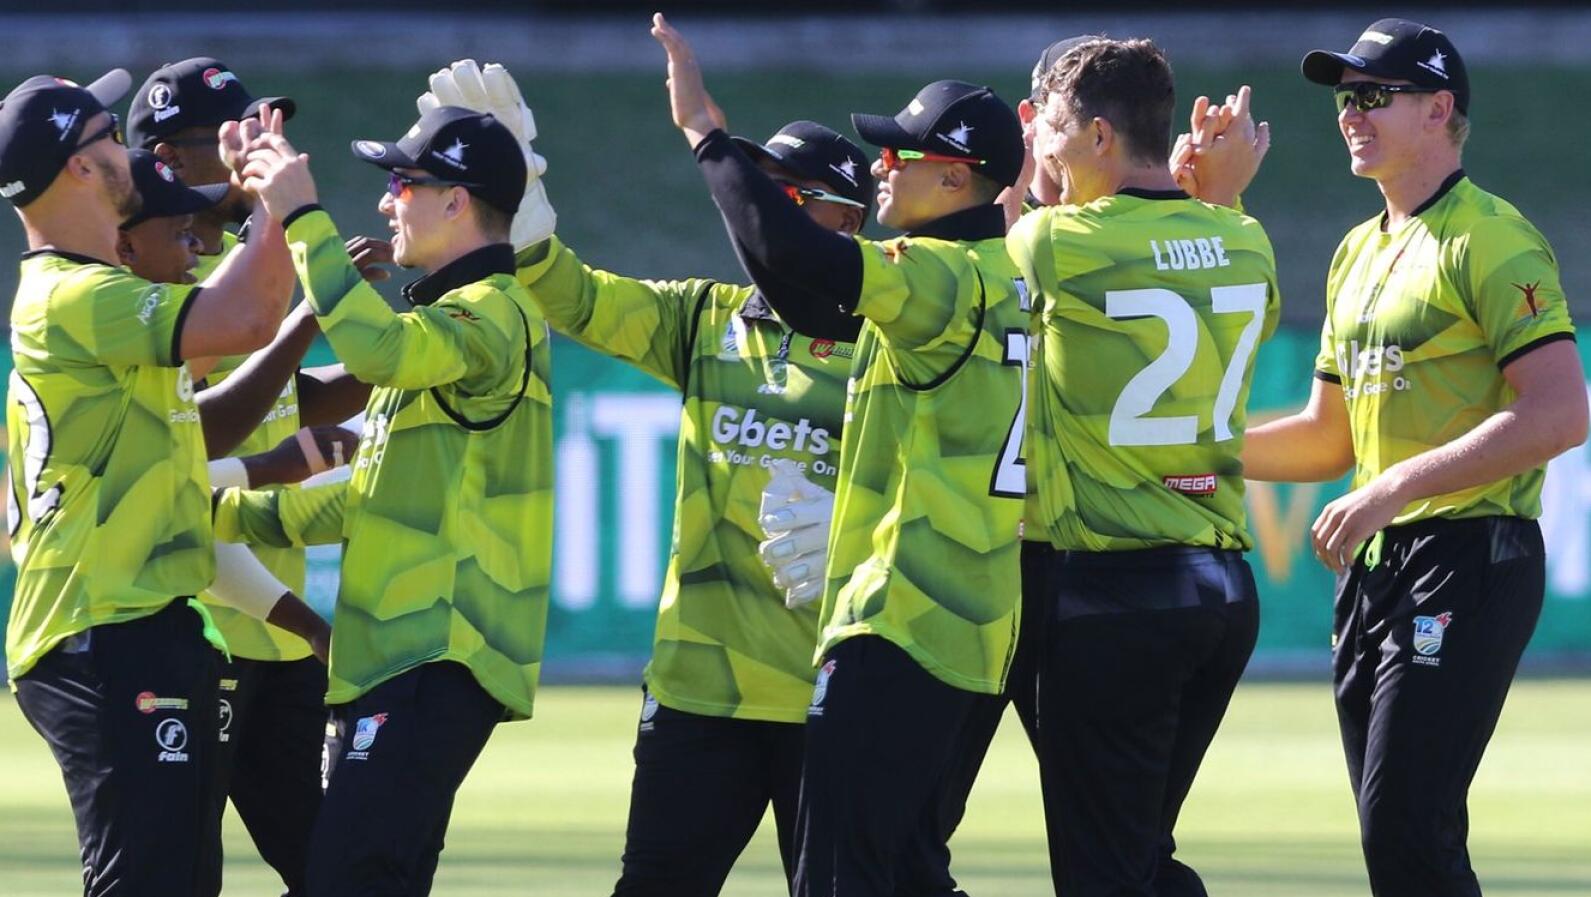 The Warriors opened their CSA T20 Challenge campaign with a thrilling eight-run victory over the Titans at St George's Park in Gqeberha on Monday